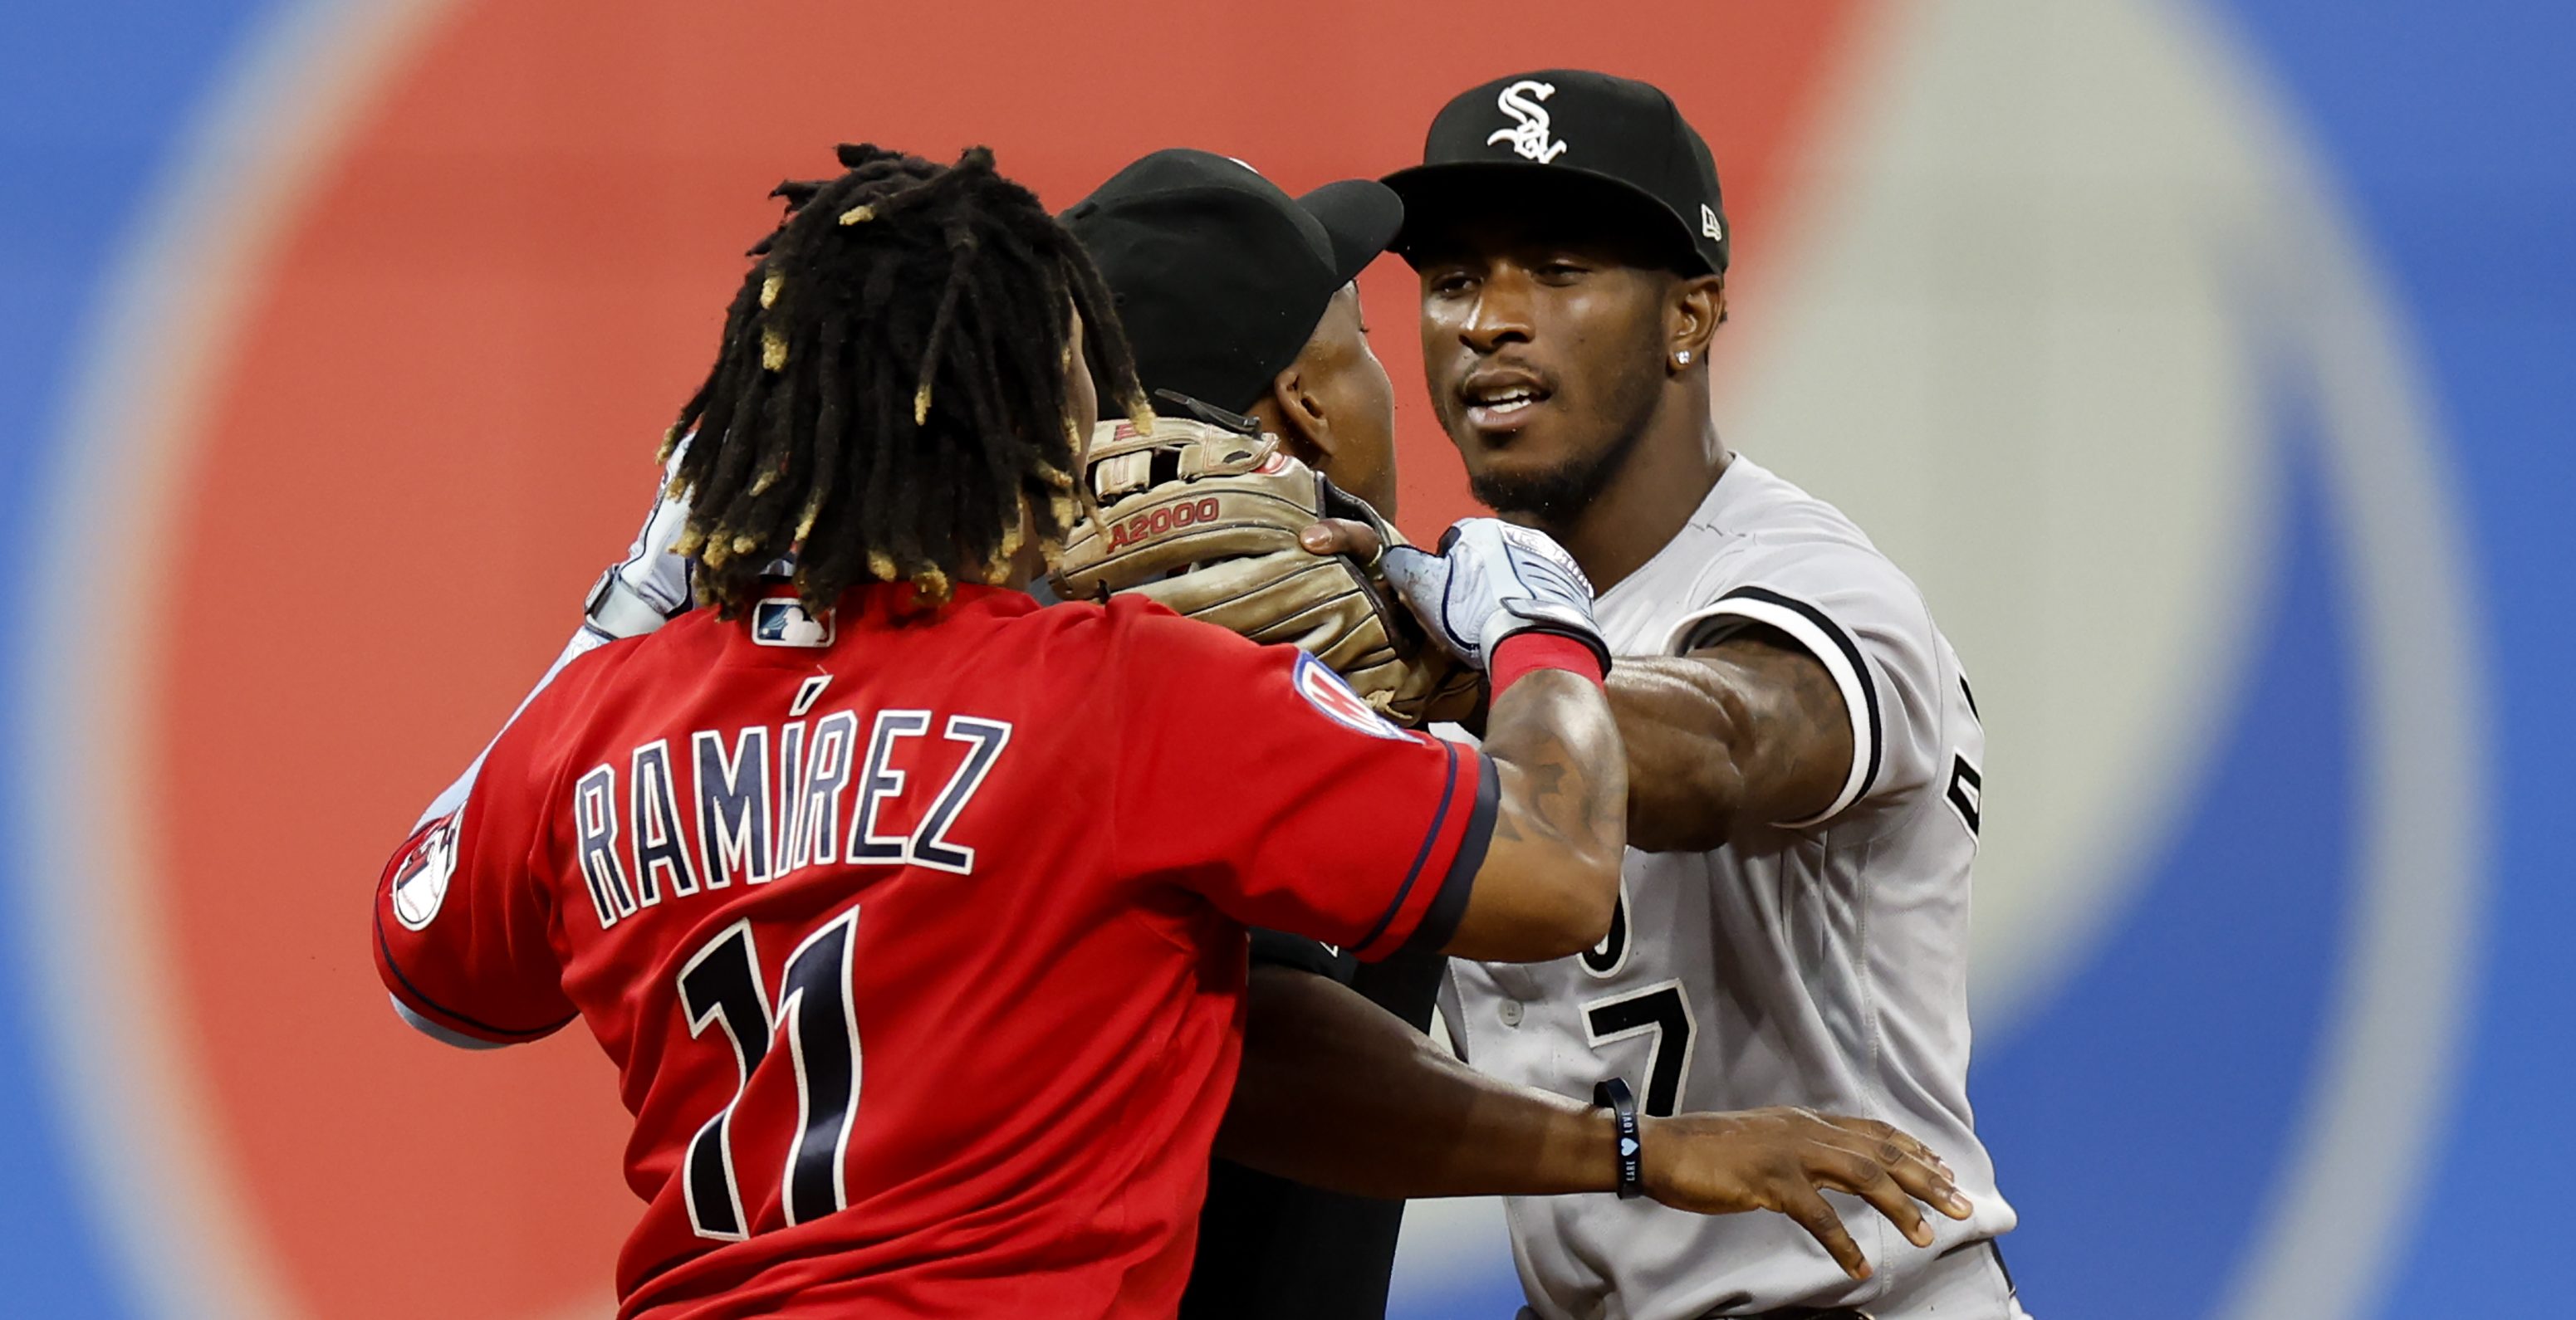 Tim Anderson and Jose Ramirez square up before throwing punches in the Guardians-White Sox game.